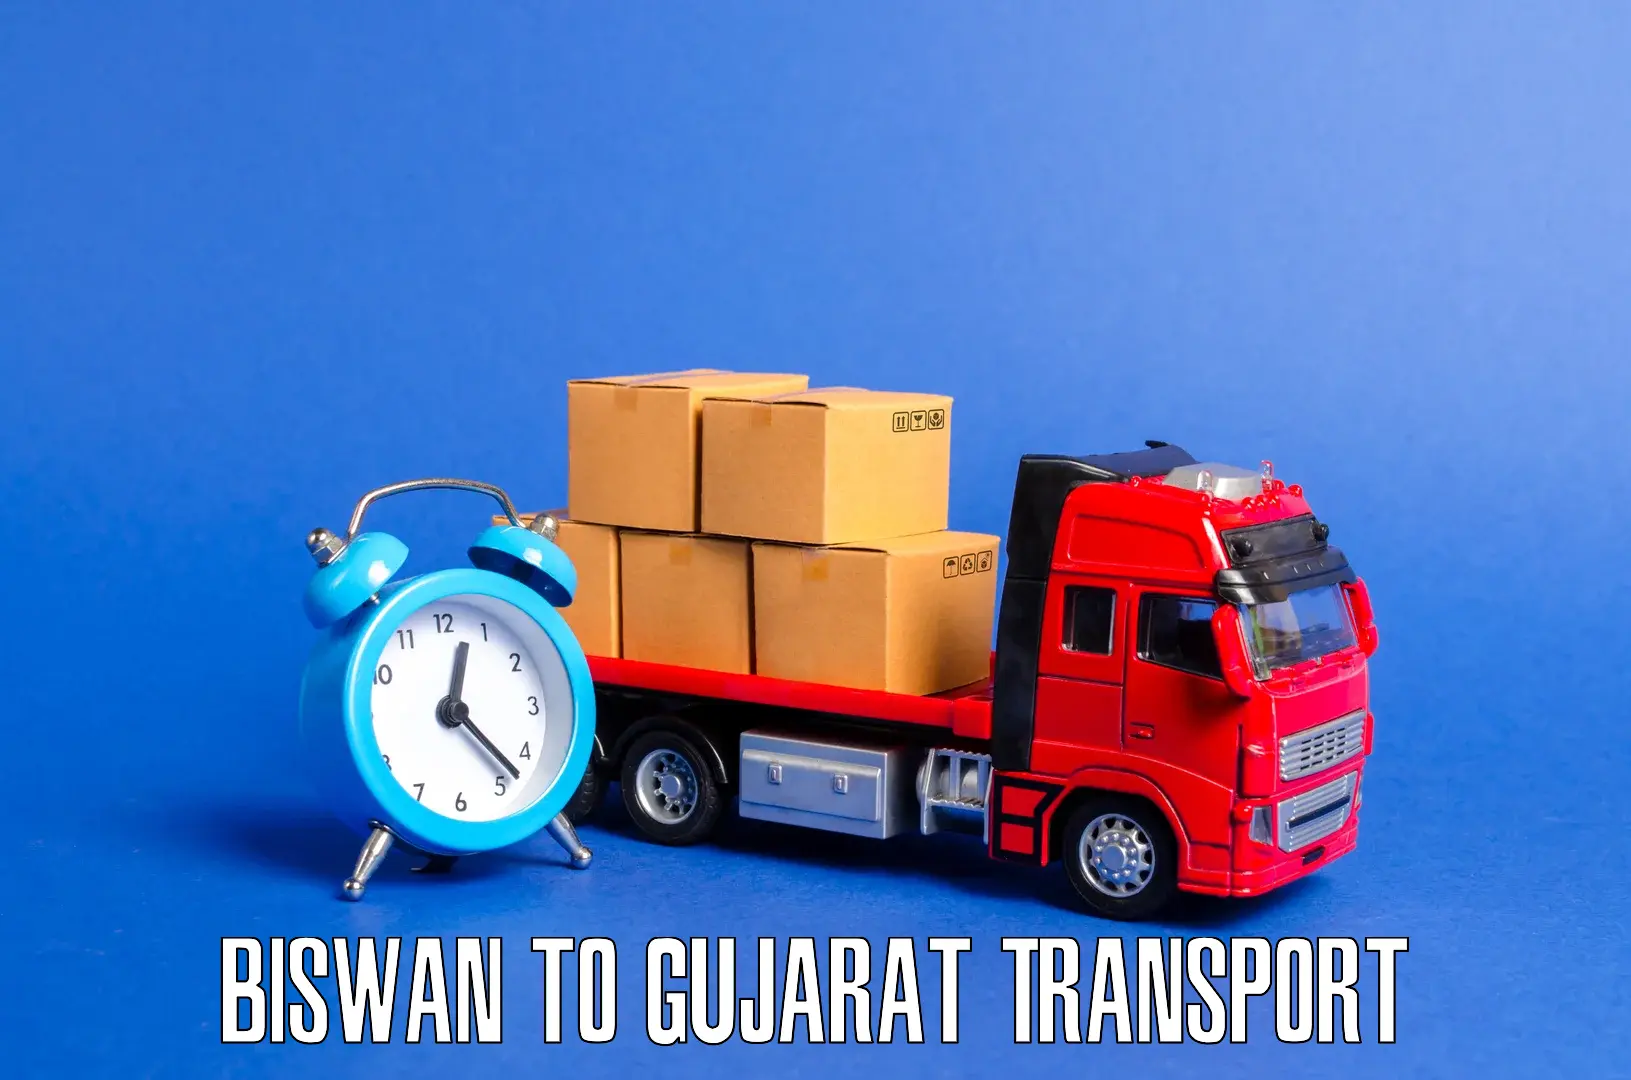 Container transport service in Biswan to Mundra